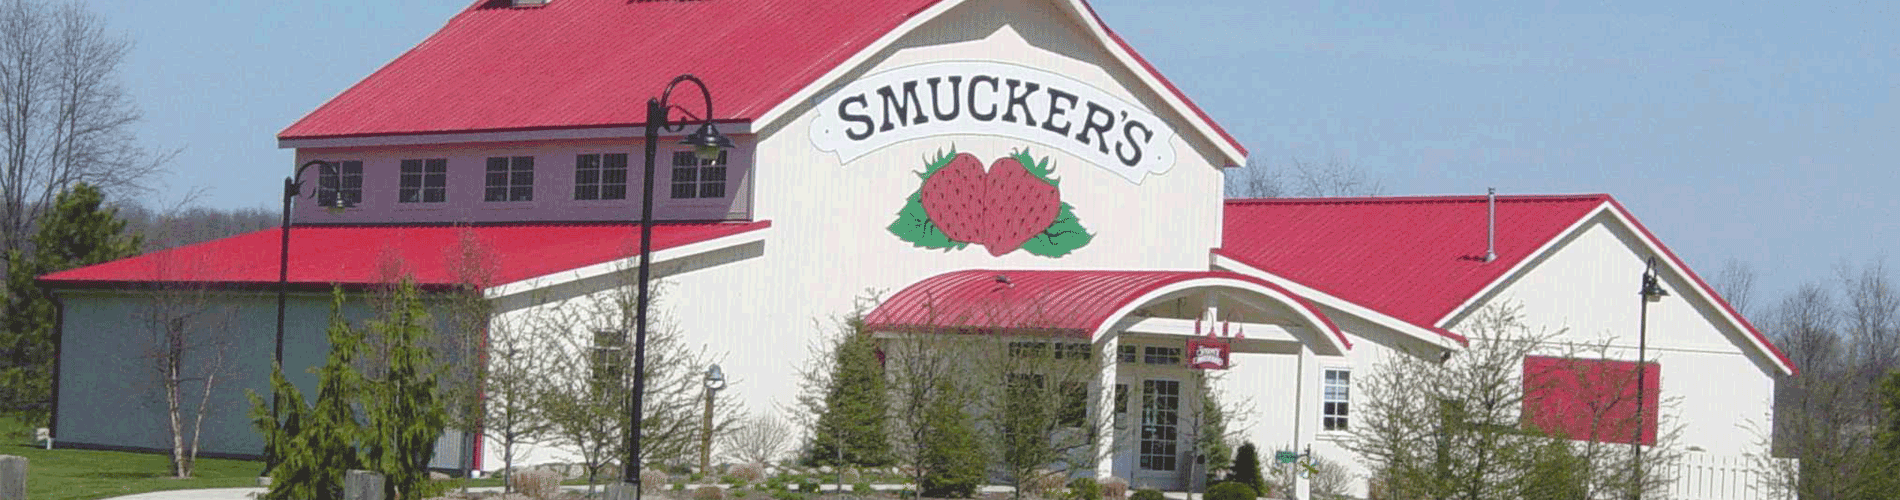 Wayne County - JM Smuckers Company Store and Cafe, Orrville, Ohio